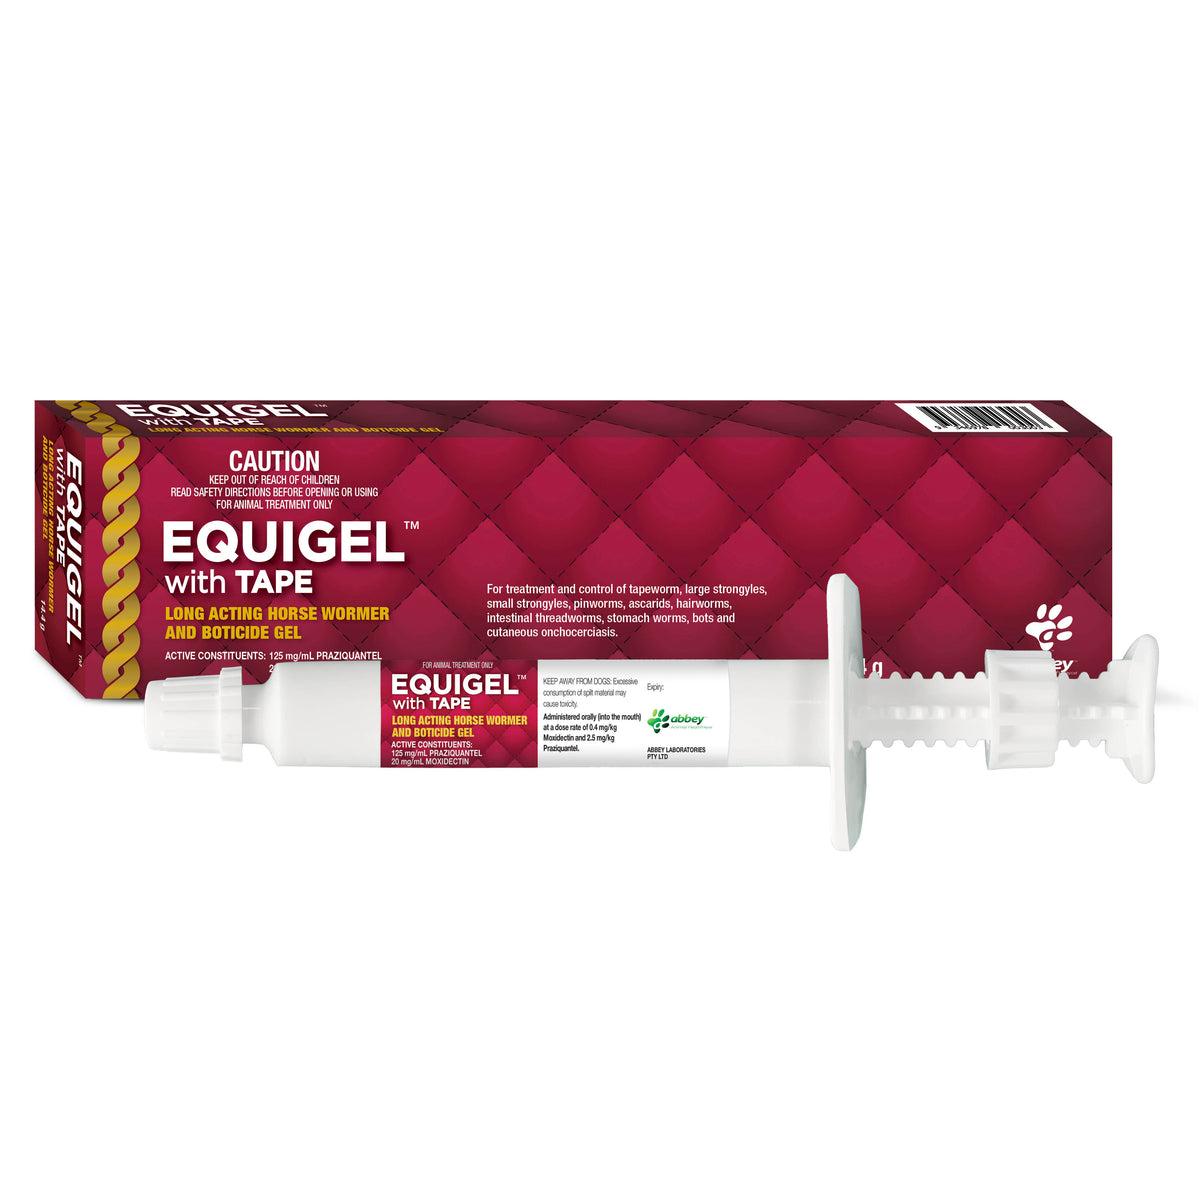 Abbey Equigel with Tape Horse Wormer 14.4g